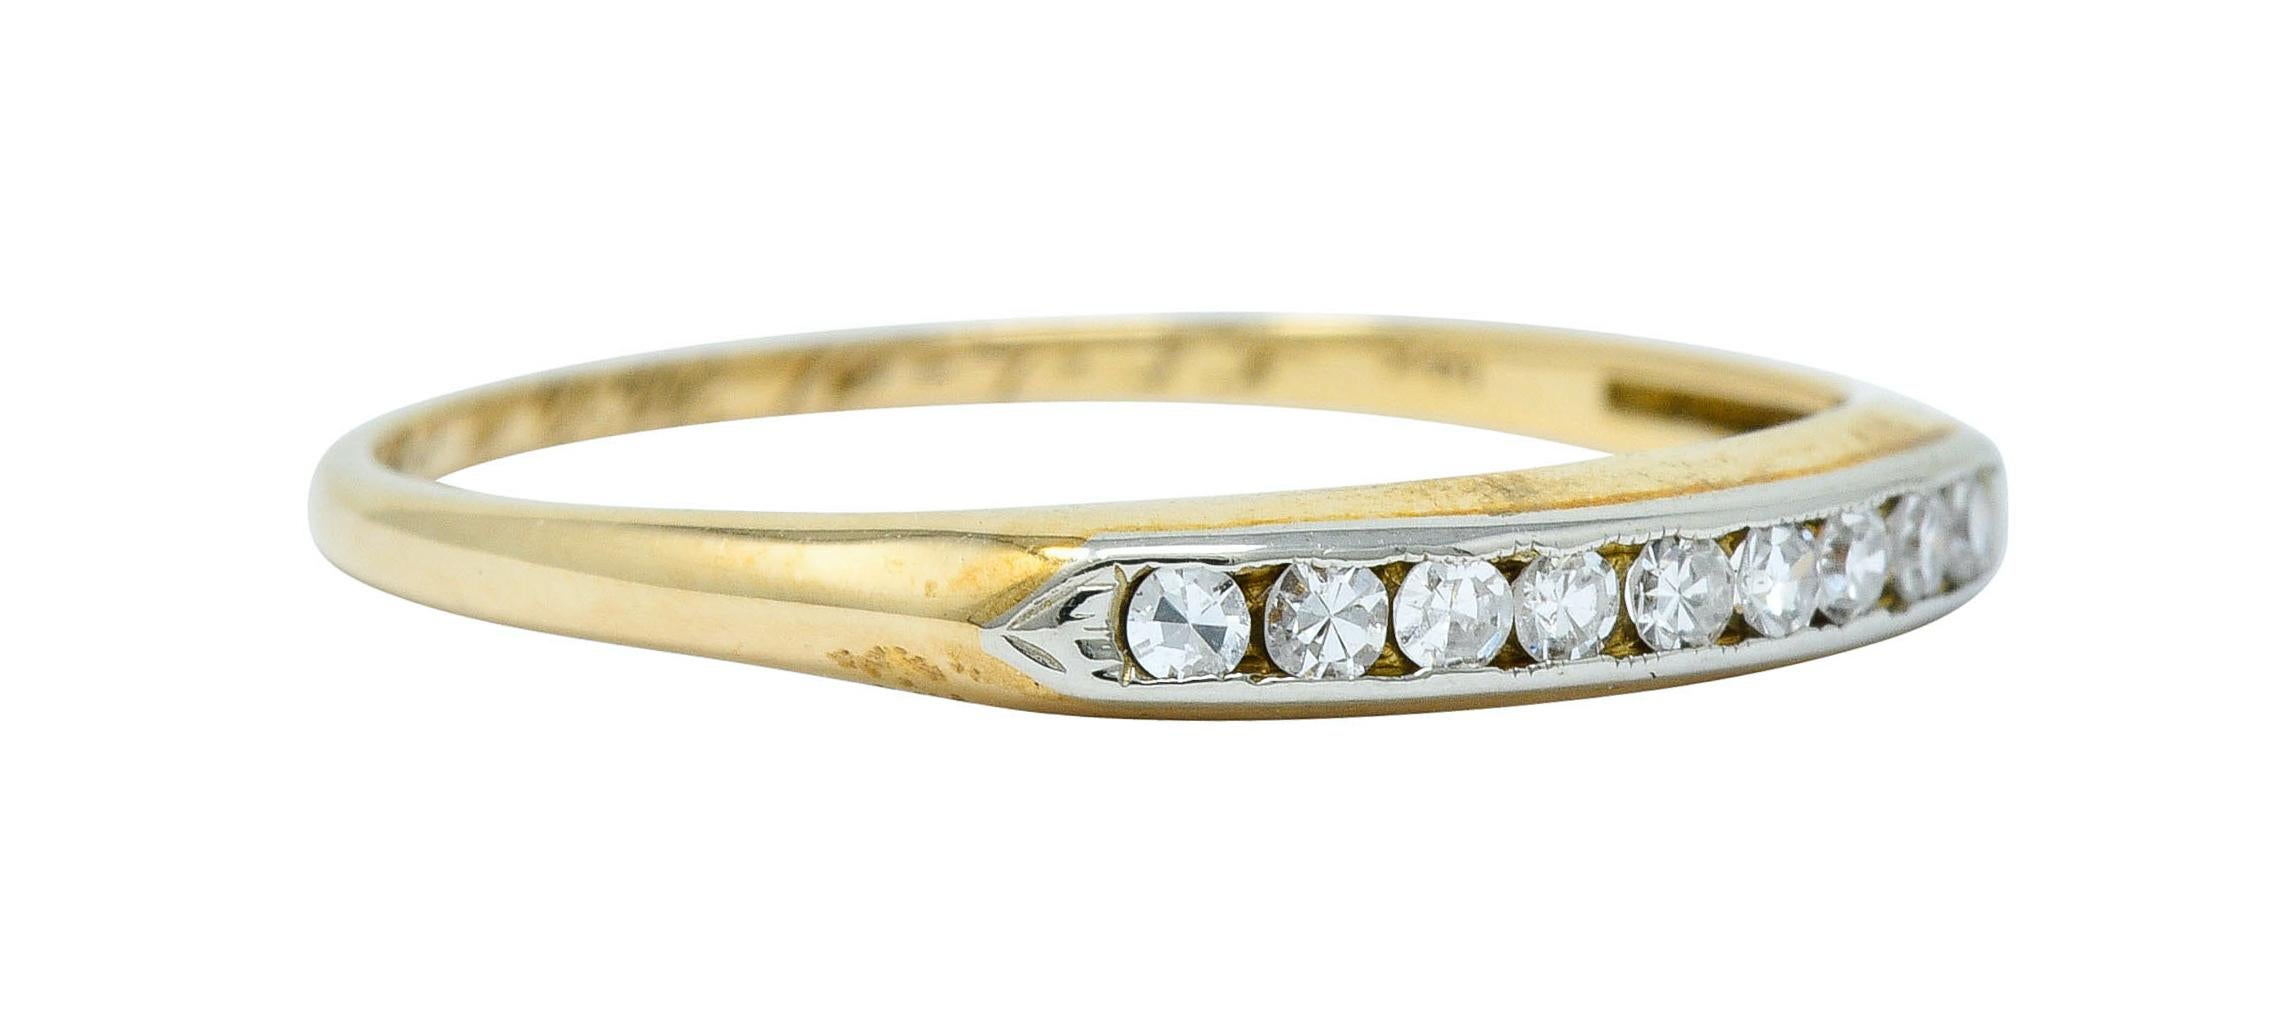 Thin band ring features nine single cut diamonds, channel set in white gold

Weighing approximately 0.20 carat with G to I color and VS clarity

Completed by pointed shoulders and a knife edged shank

Stamped 14K for 14 karat gold

With a dated